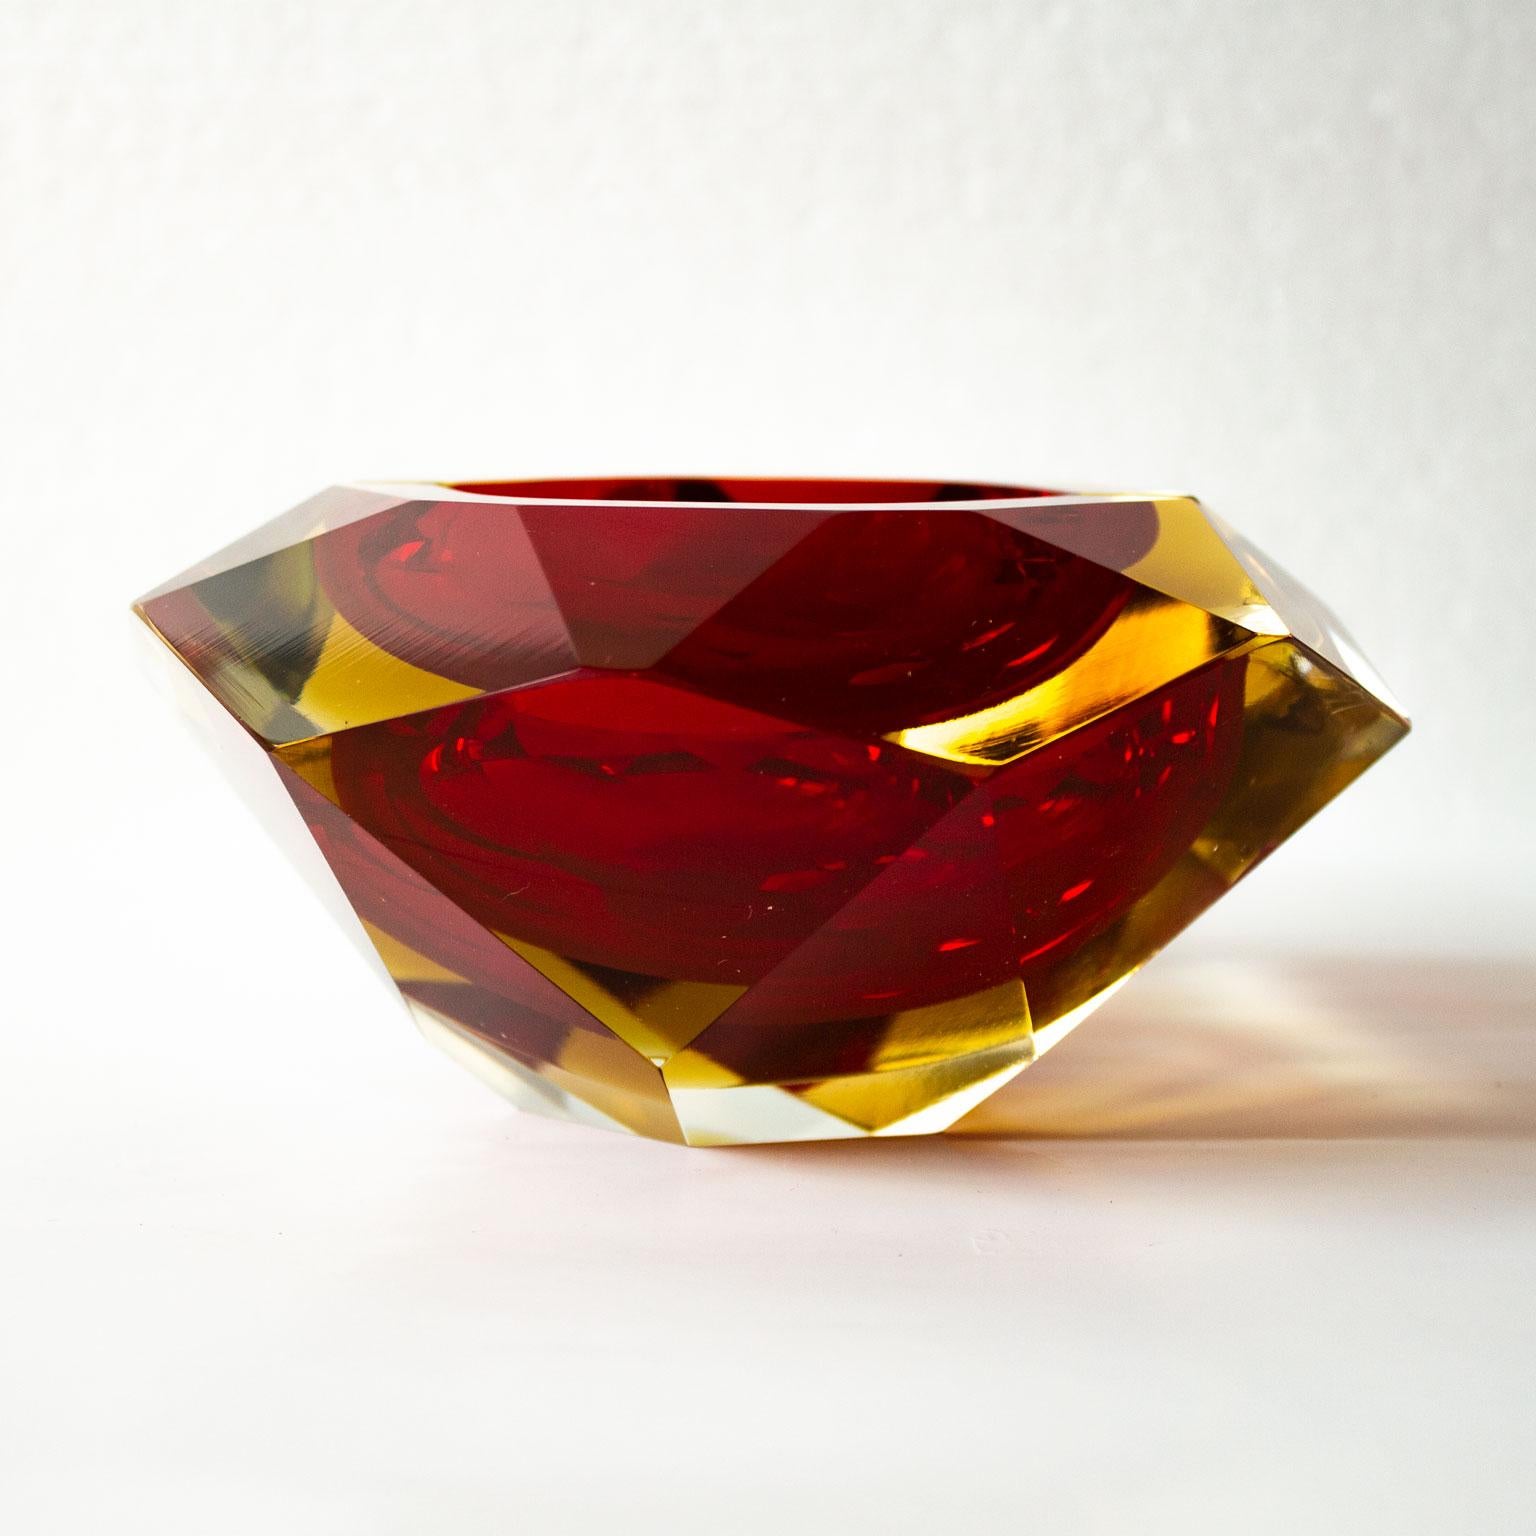 Italian Large, Heavy Flavio Poli Sommerso Murano Ashtray 1950s Faceted Red Blue Glass For Sale